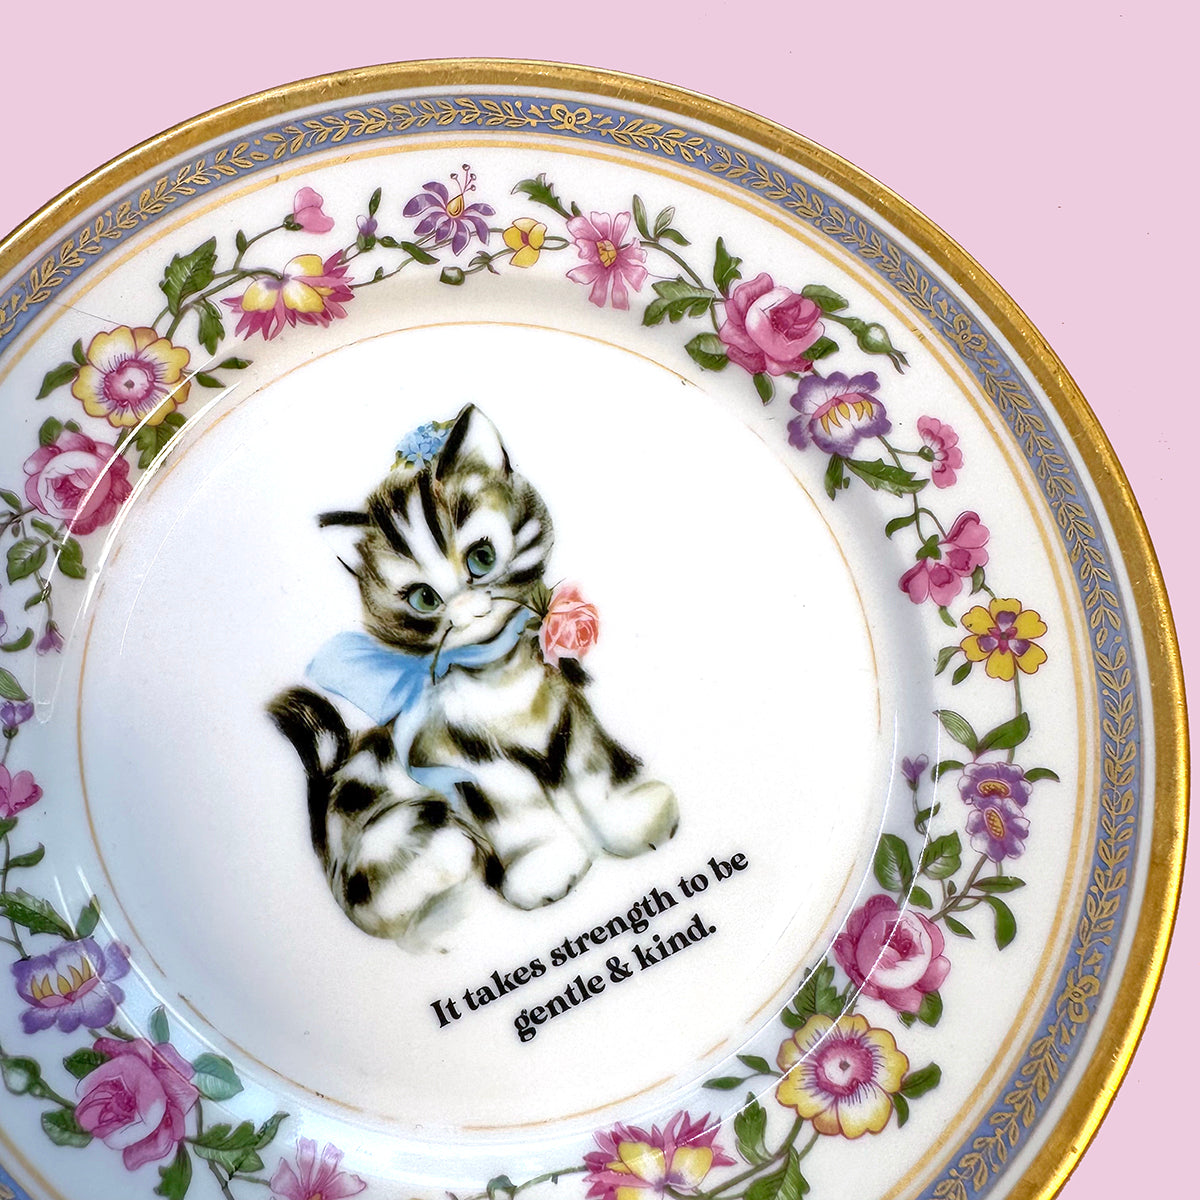 Vintage Art Plate - Cat plate - "It takes strength to be gentle & kind."